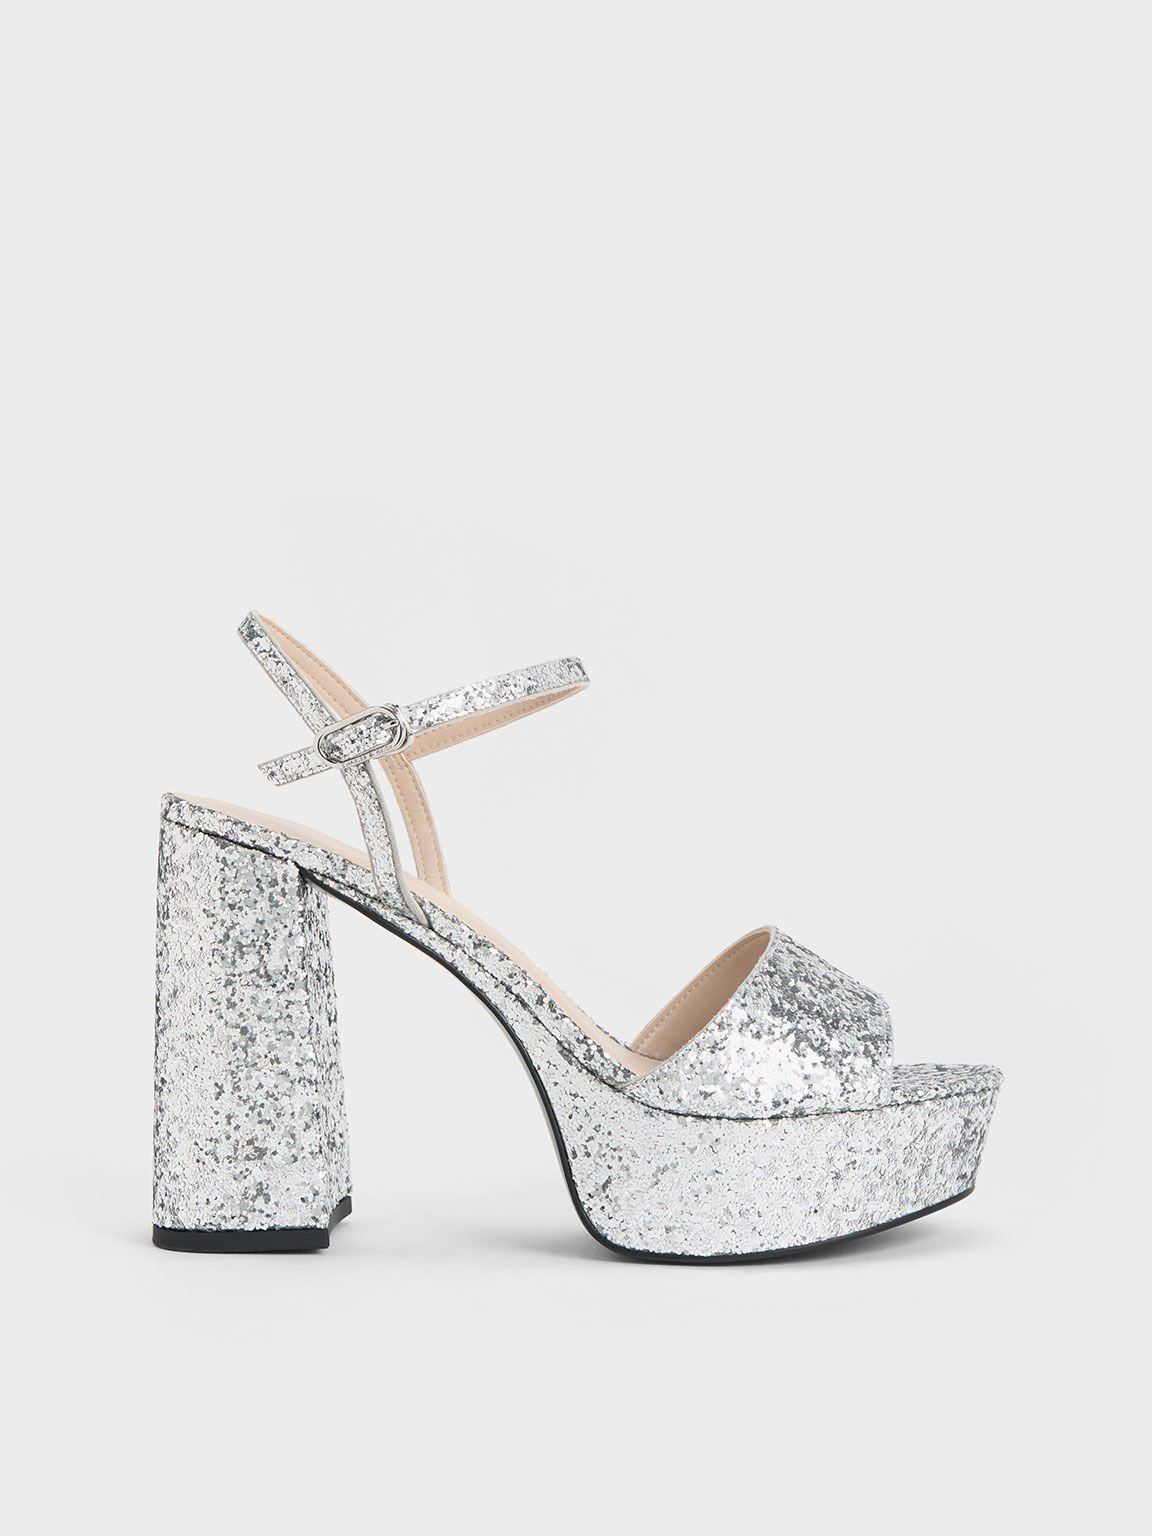 Silver Glittered Ankle-Strap Platform Sandals - CHARLES & KEITH IN